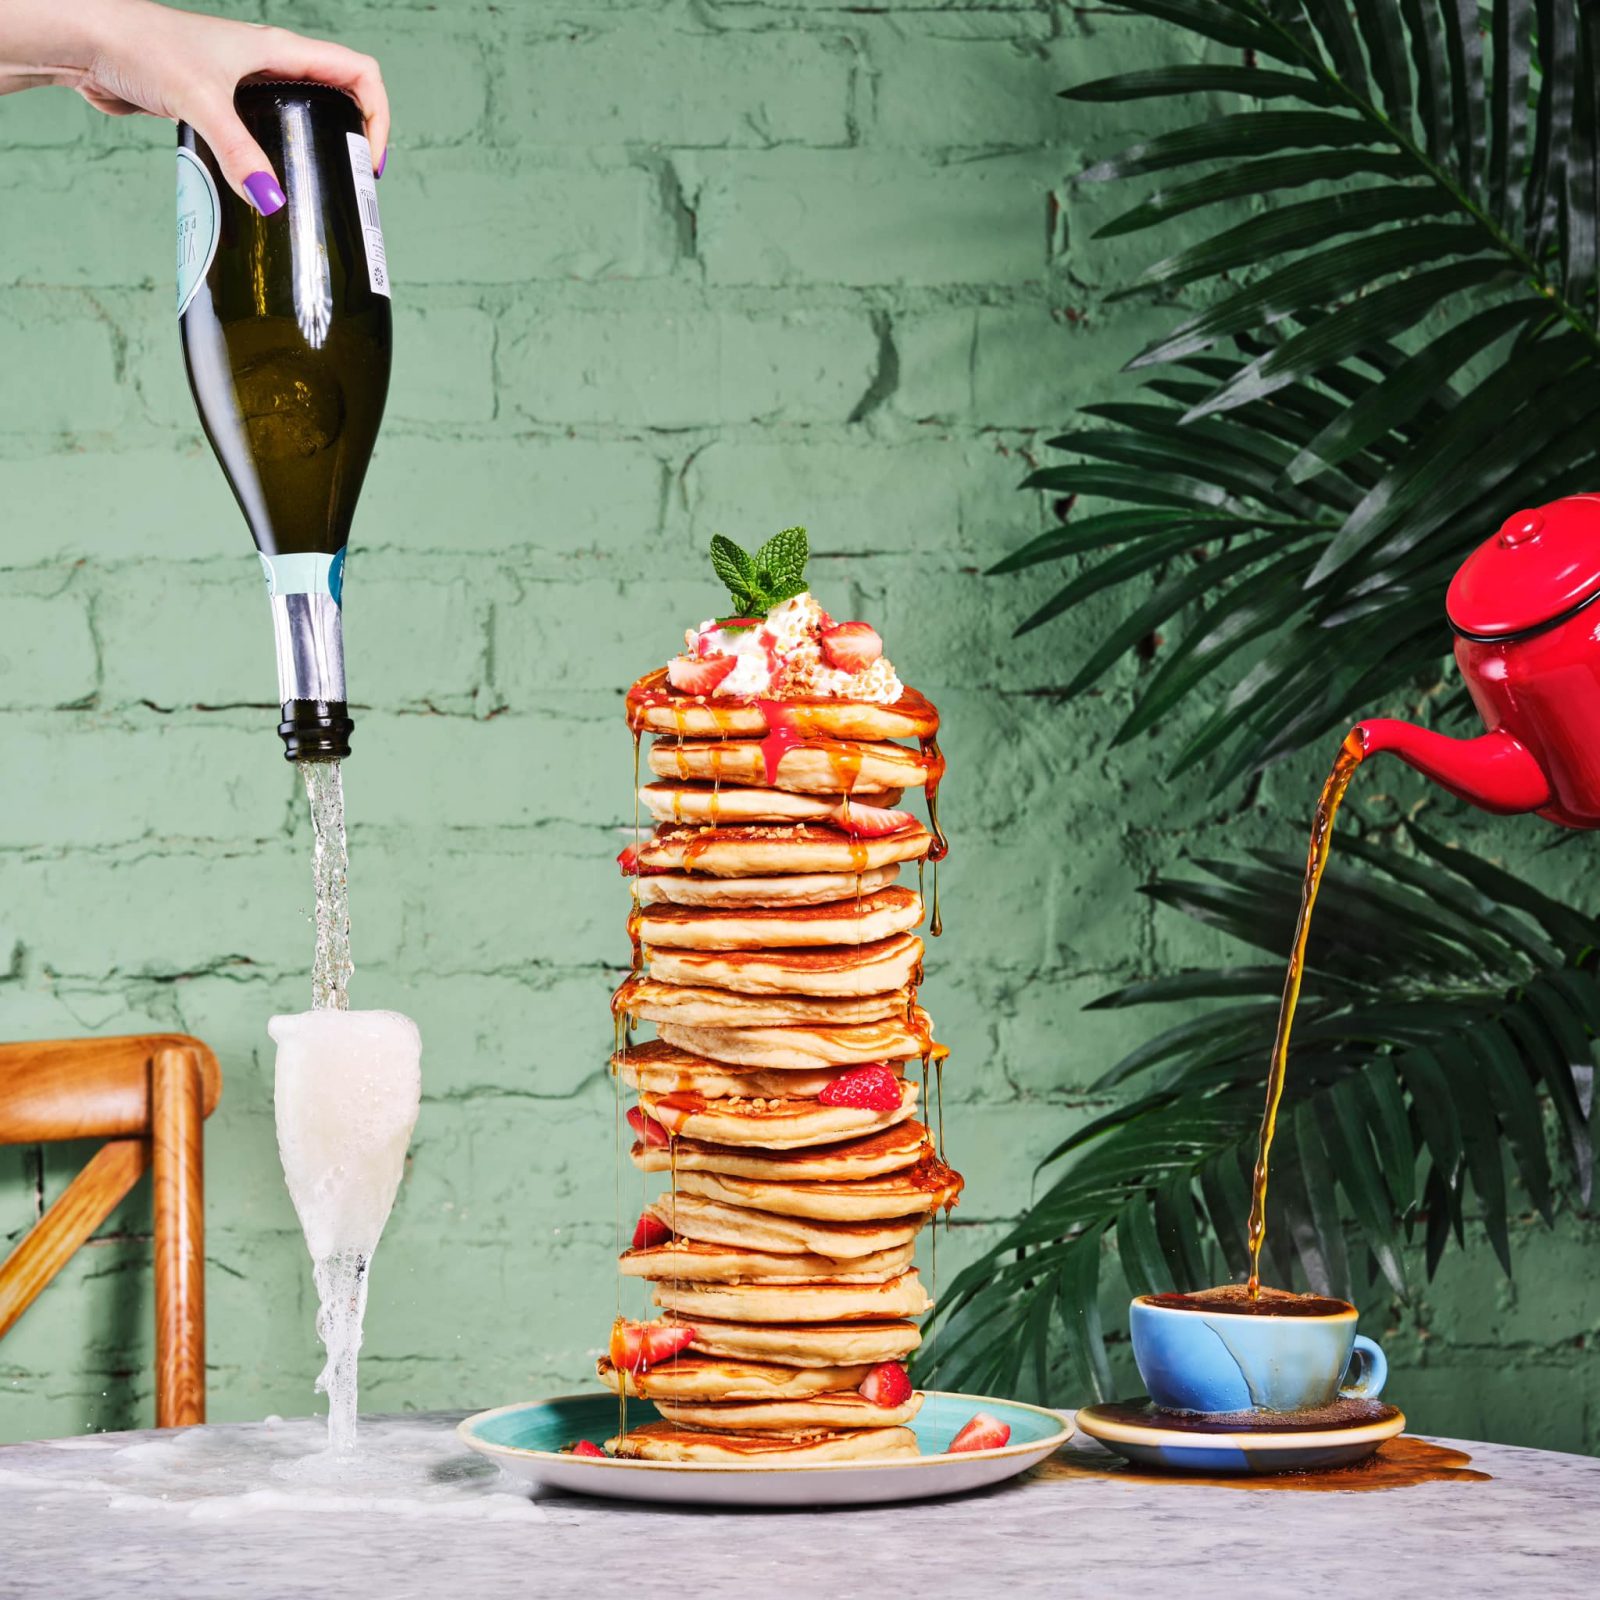 A huge stack of Pancakes and a bottle of prosecco. 